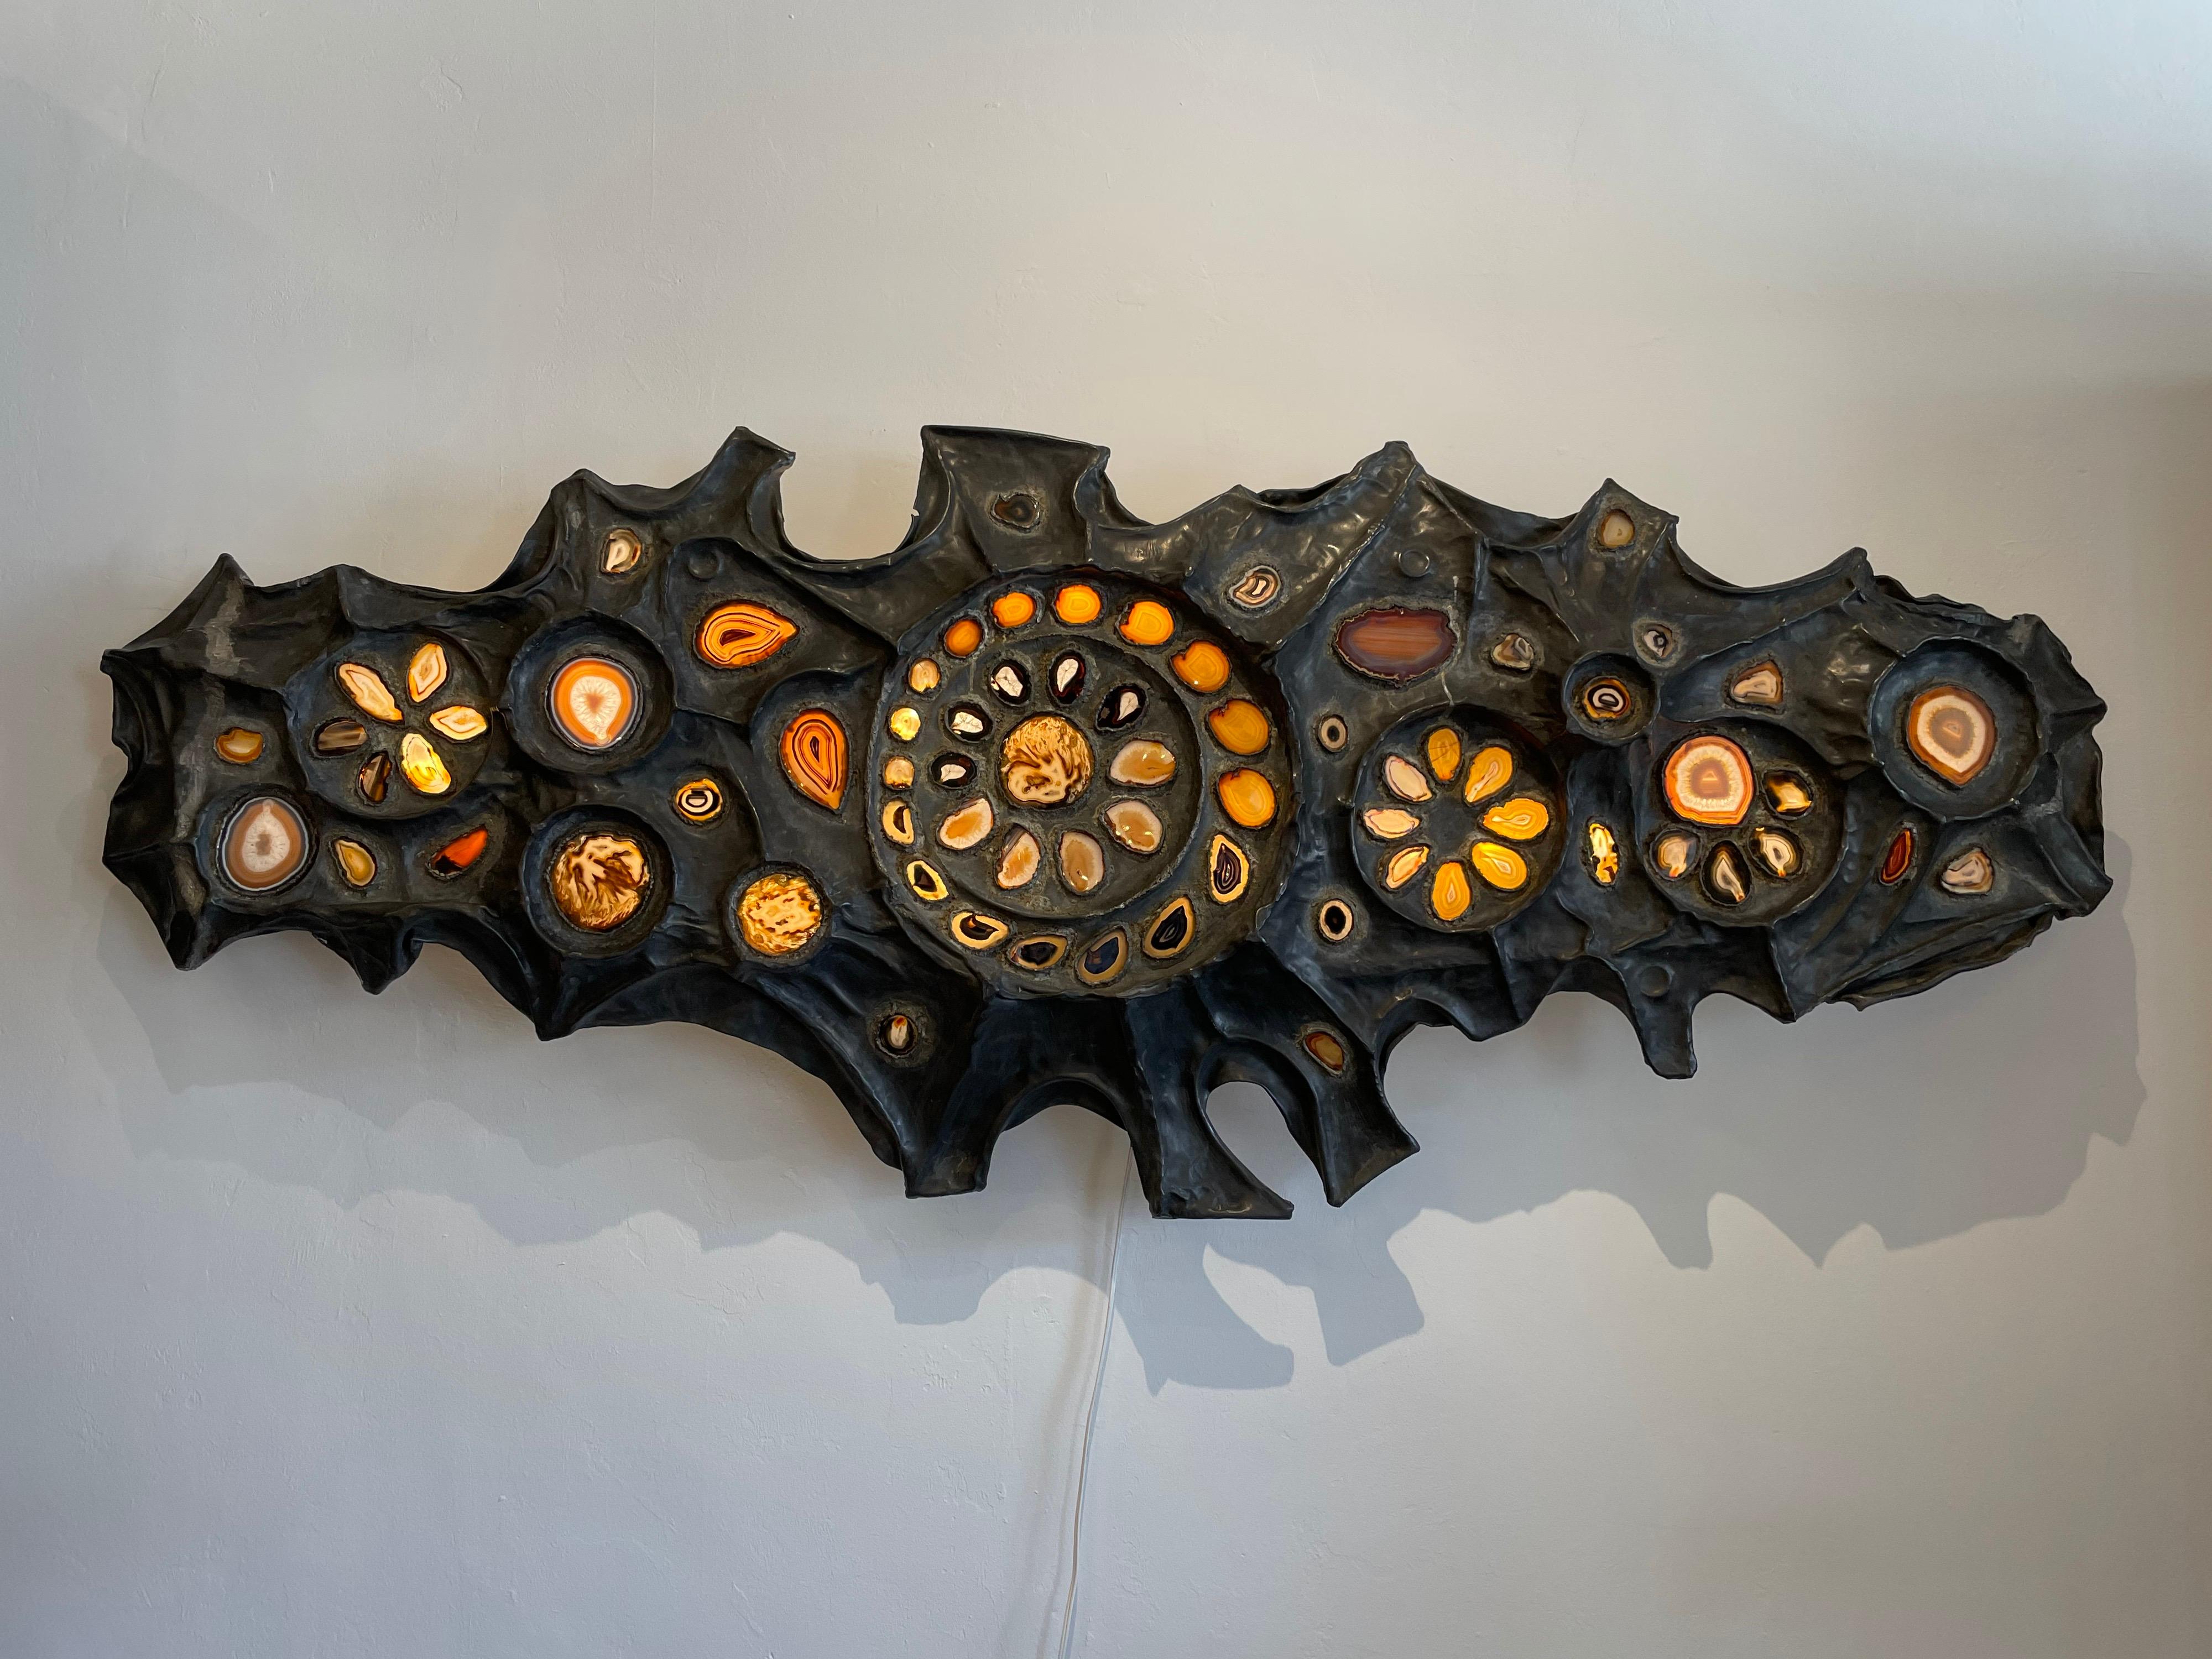 Extraordinary Oversized Lead & Agate Illuminated Wall Sculpture For Sale 3